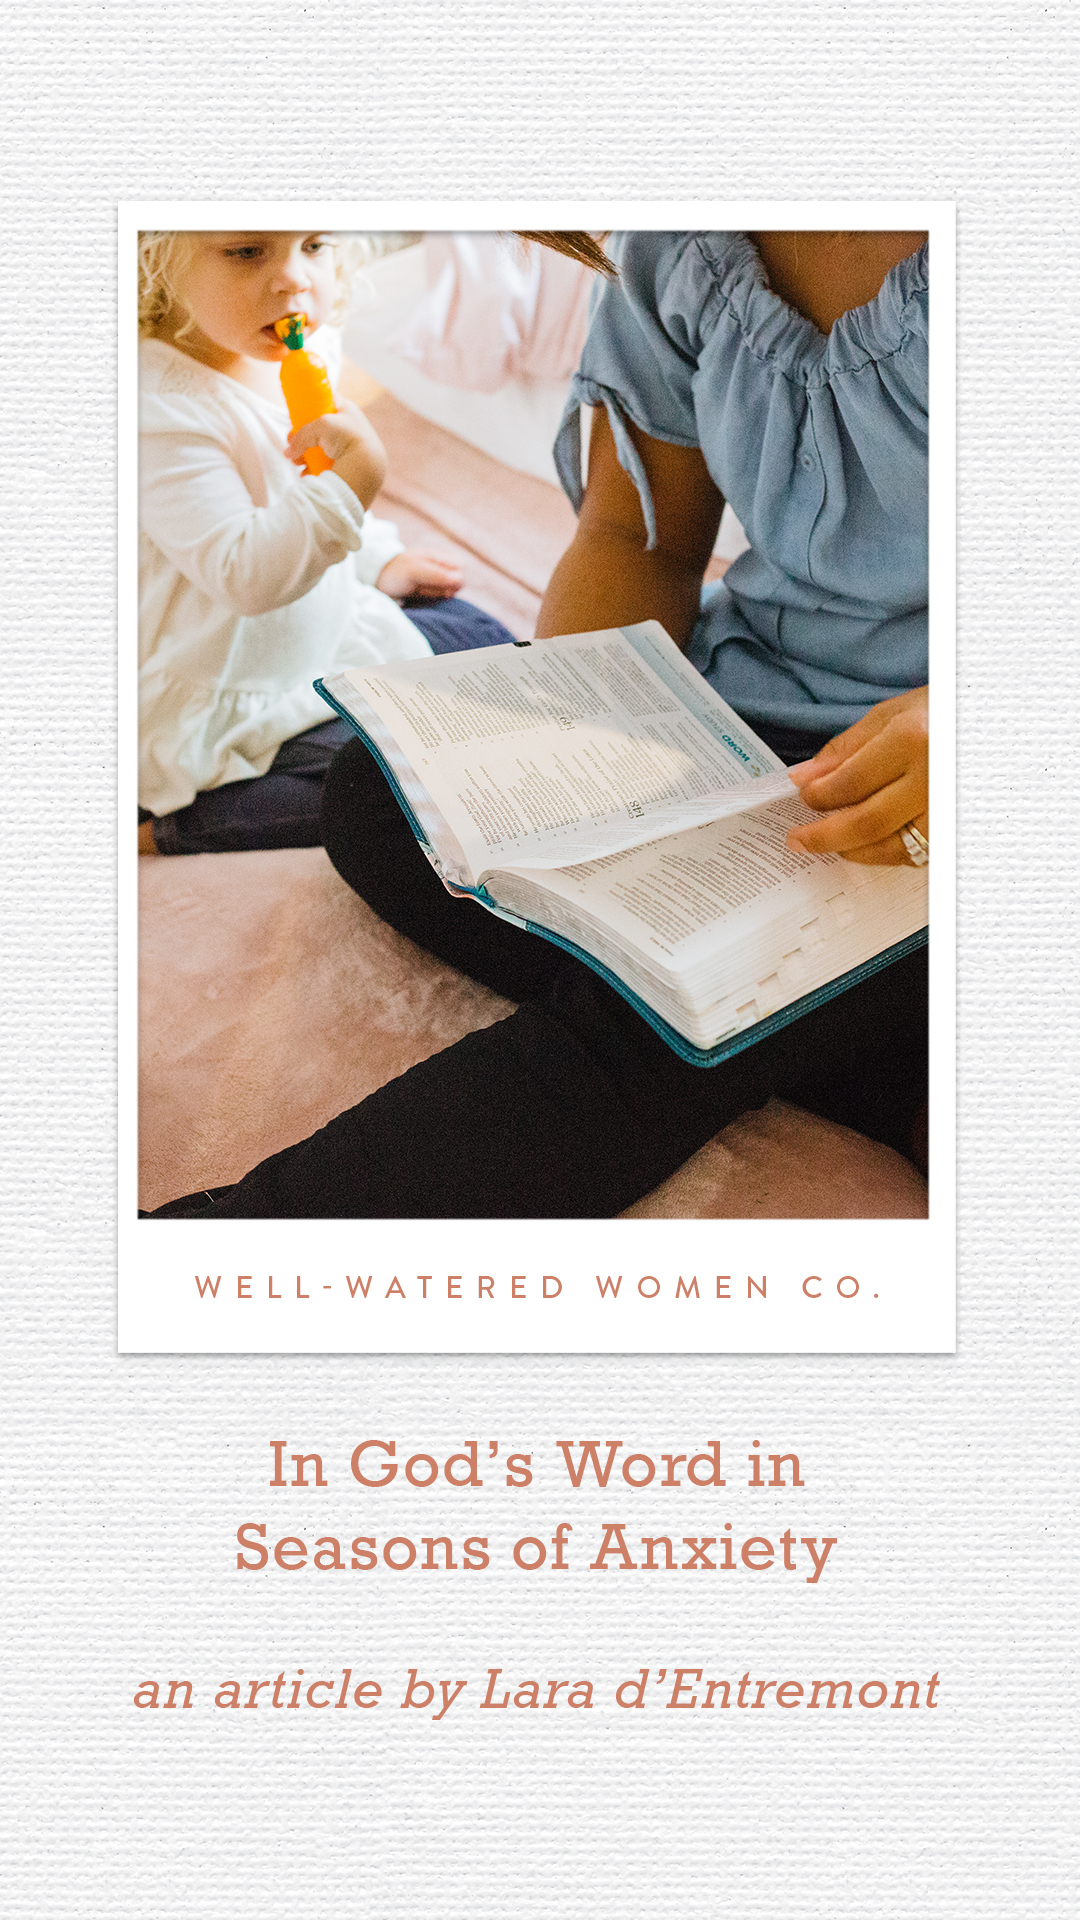 In God's Word in Seasons of Anxiety – an article by Well-Watered Women